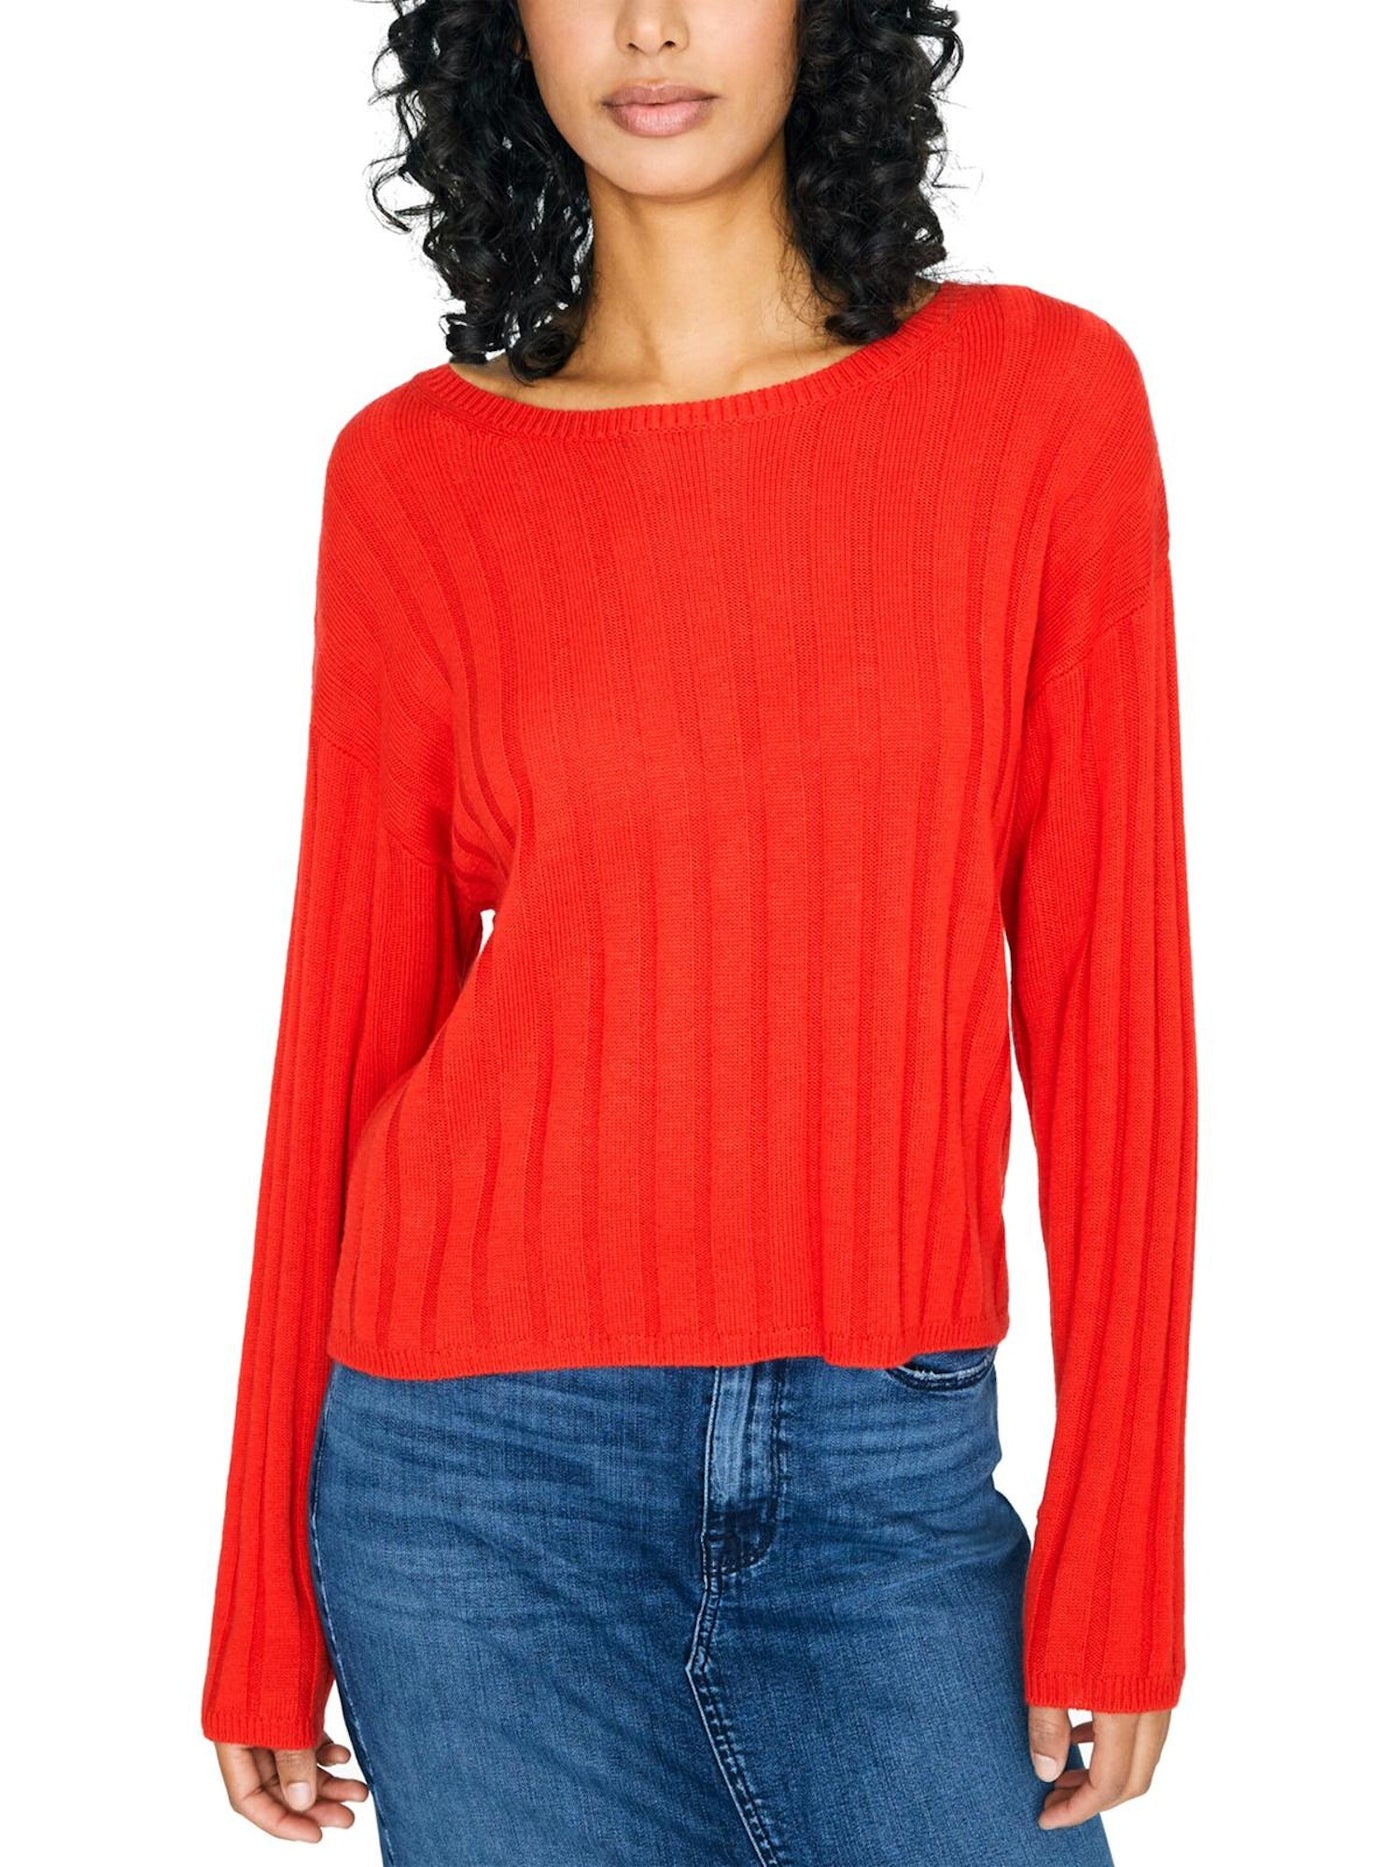 SANCTUARY Womens Red Ribbed Long Sleeve Jewel Neck Sweater XL